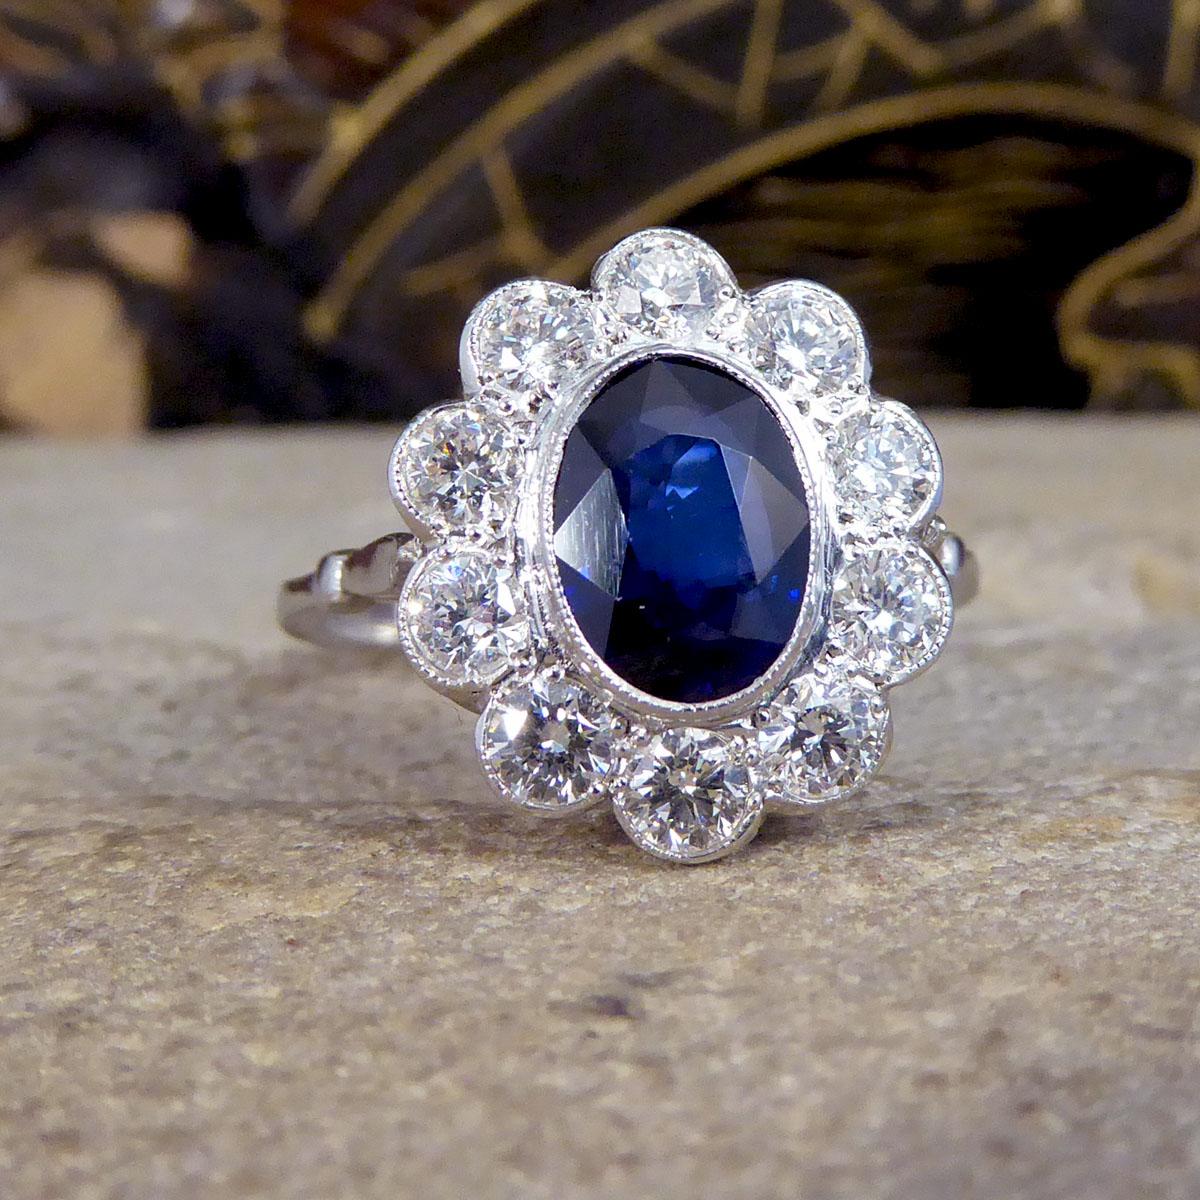 This contemporary ring holds a 2.07ct deep blue Sapphire in the centre of the ring and surrounded by 10 Modern Brilliant cut bright and clear Diamonds making a cluster. Complimenting the Sapphire gemstone is a Platinum rub over collar setting,